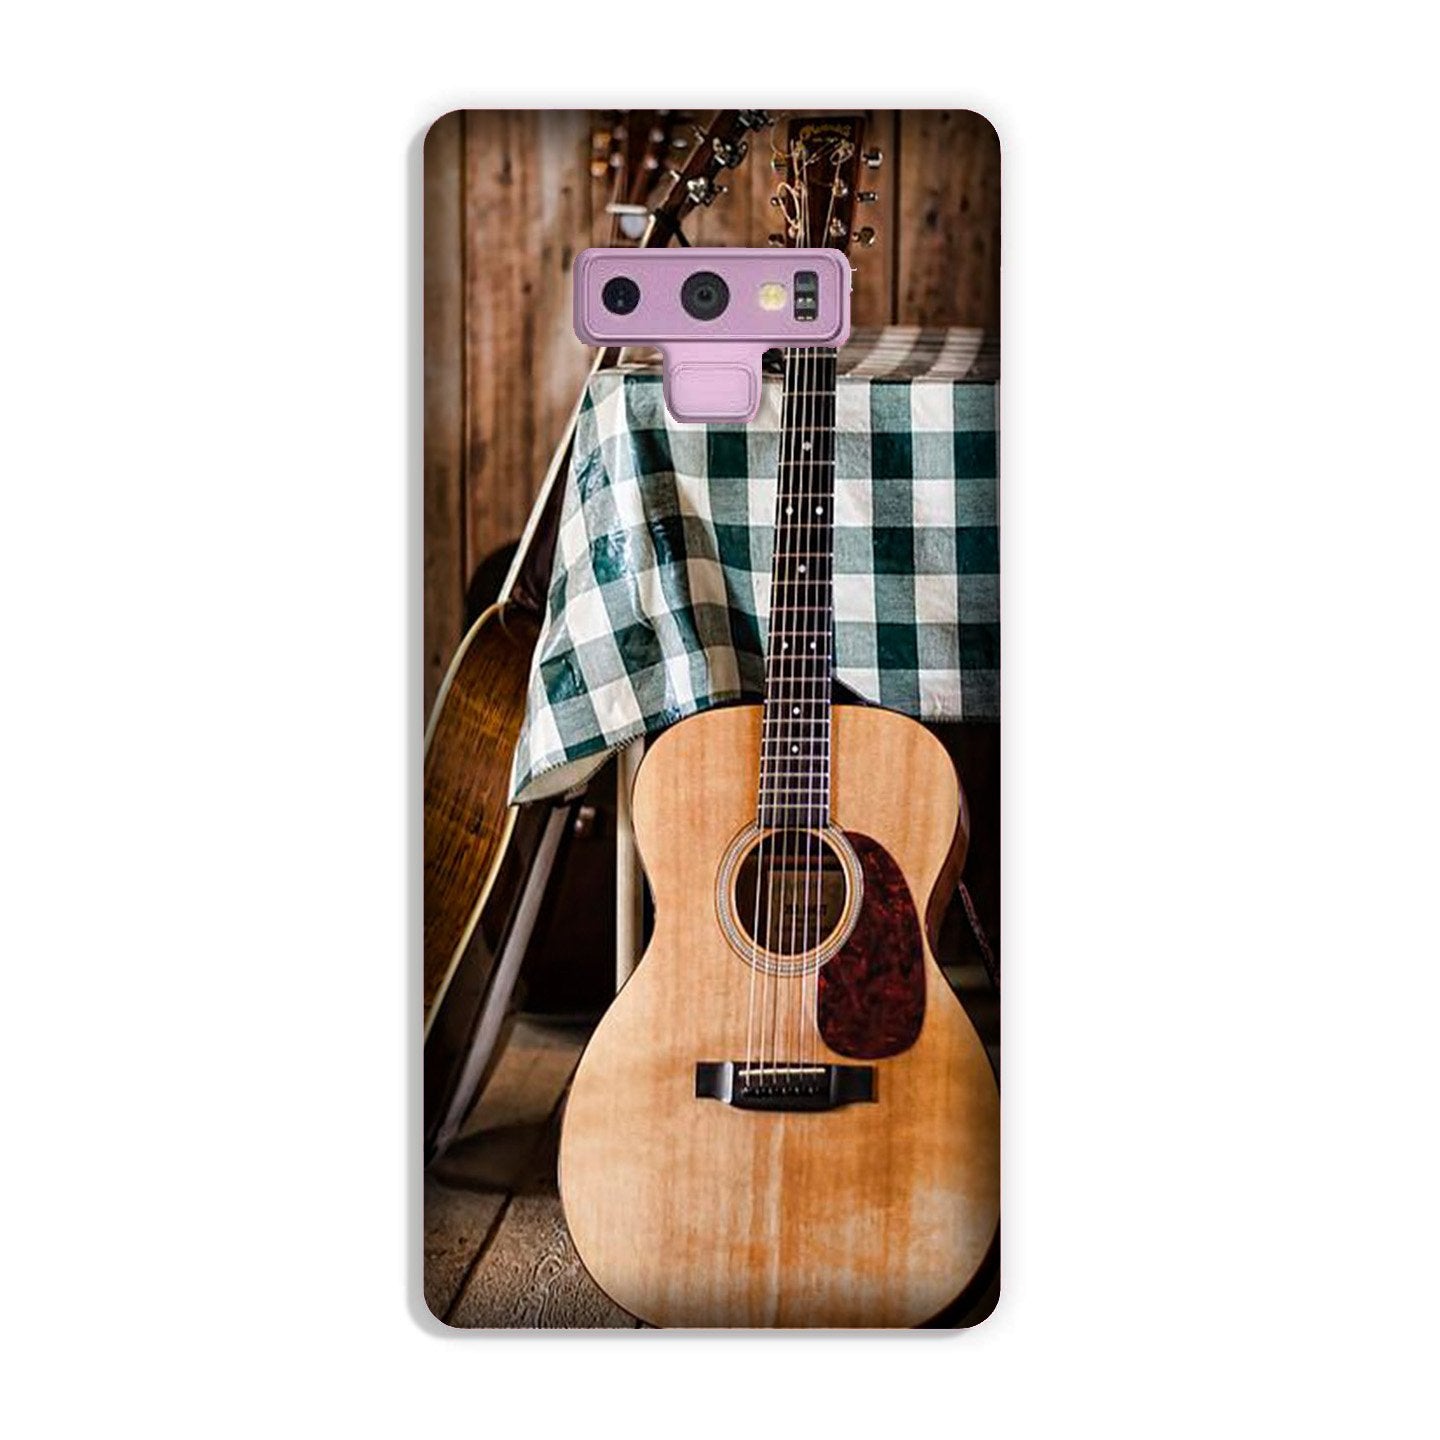 Guitar2 Case for Galaxy Note 9